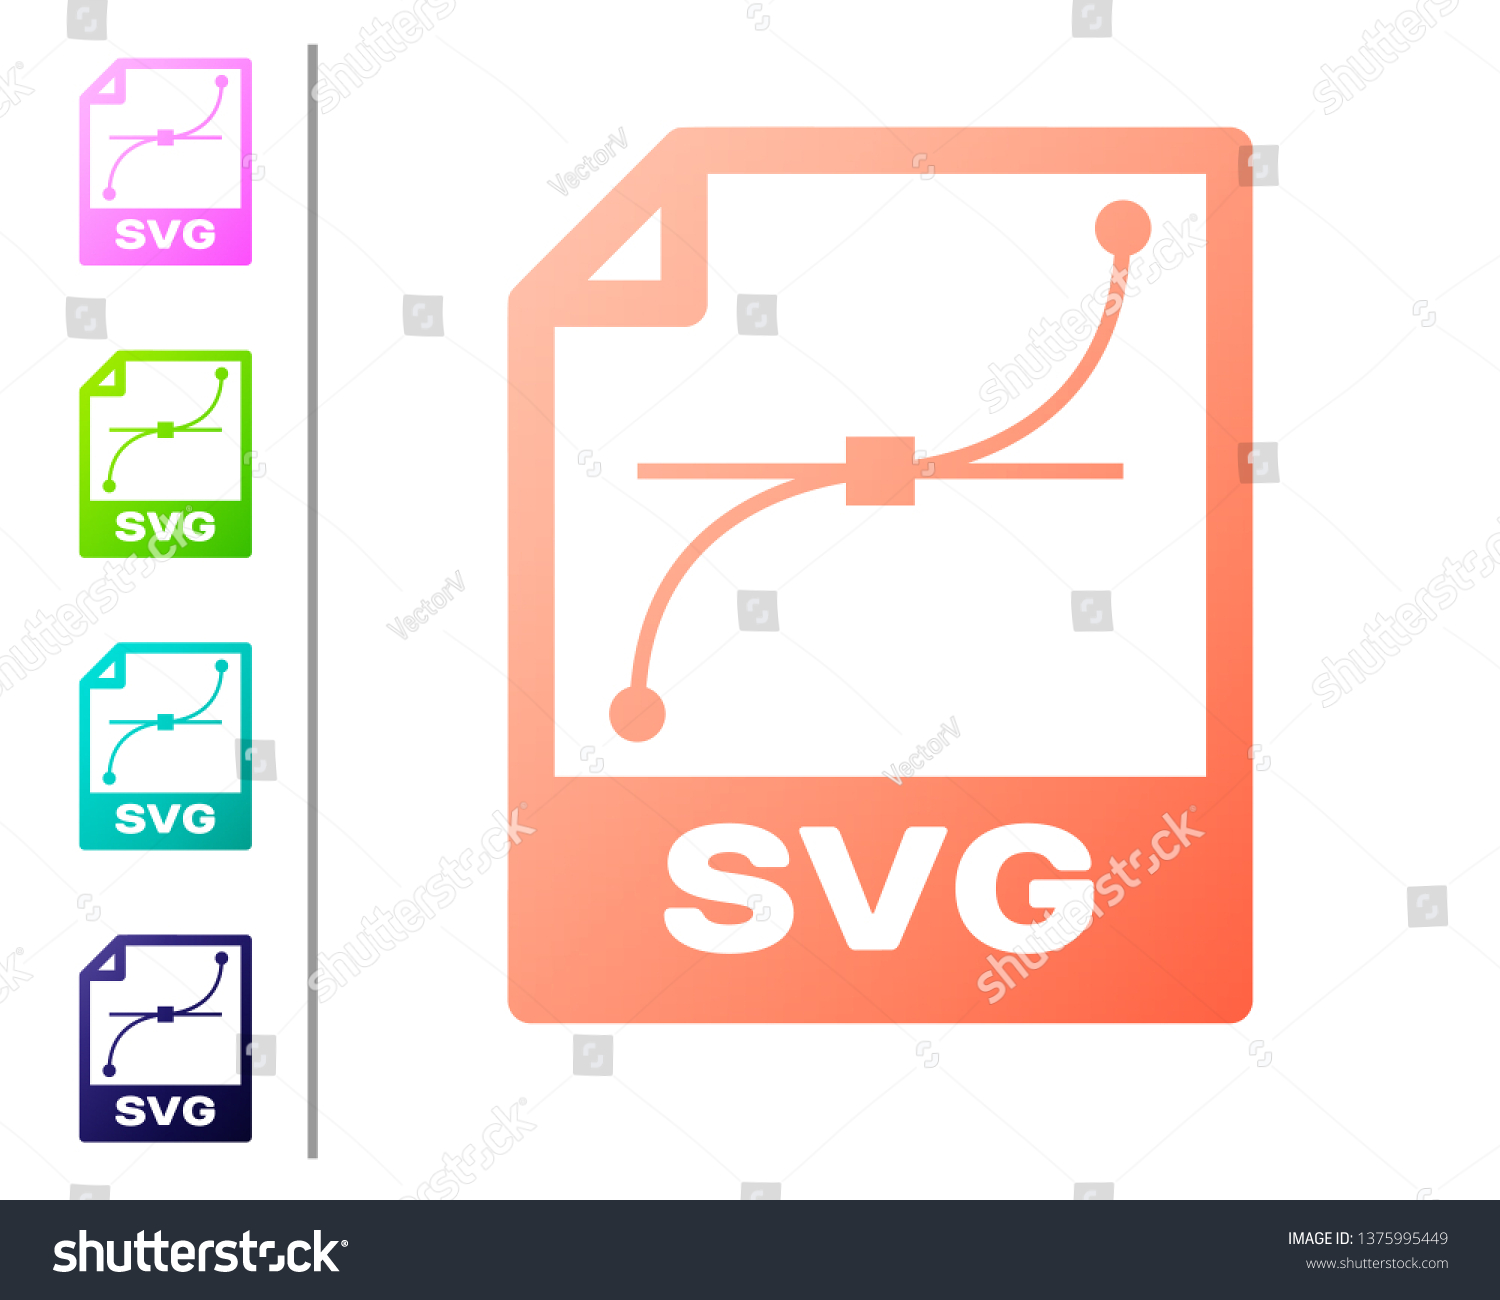 SVG of Coral SVG file document icon. Download svg button icon isolated on white background. SVG file symbol. Set color icons. Vector Illustration svg